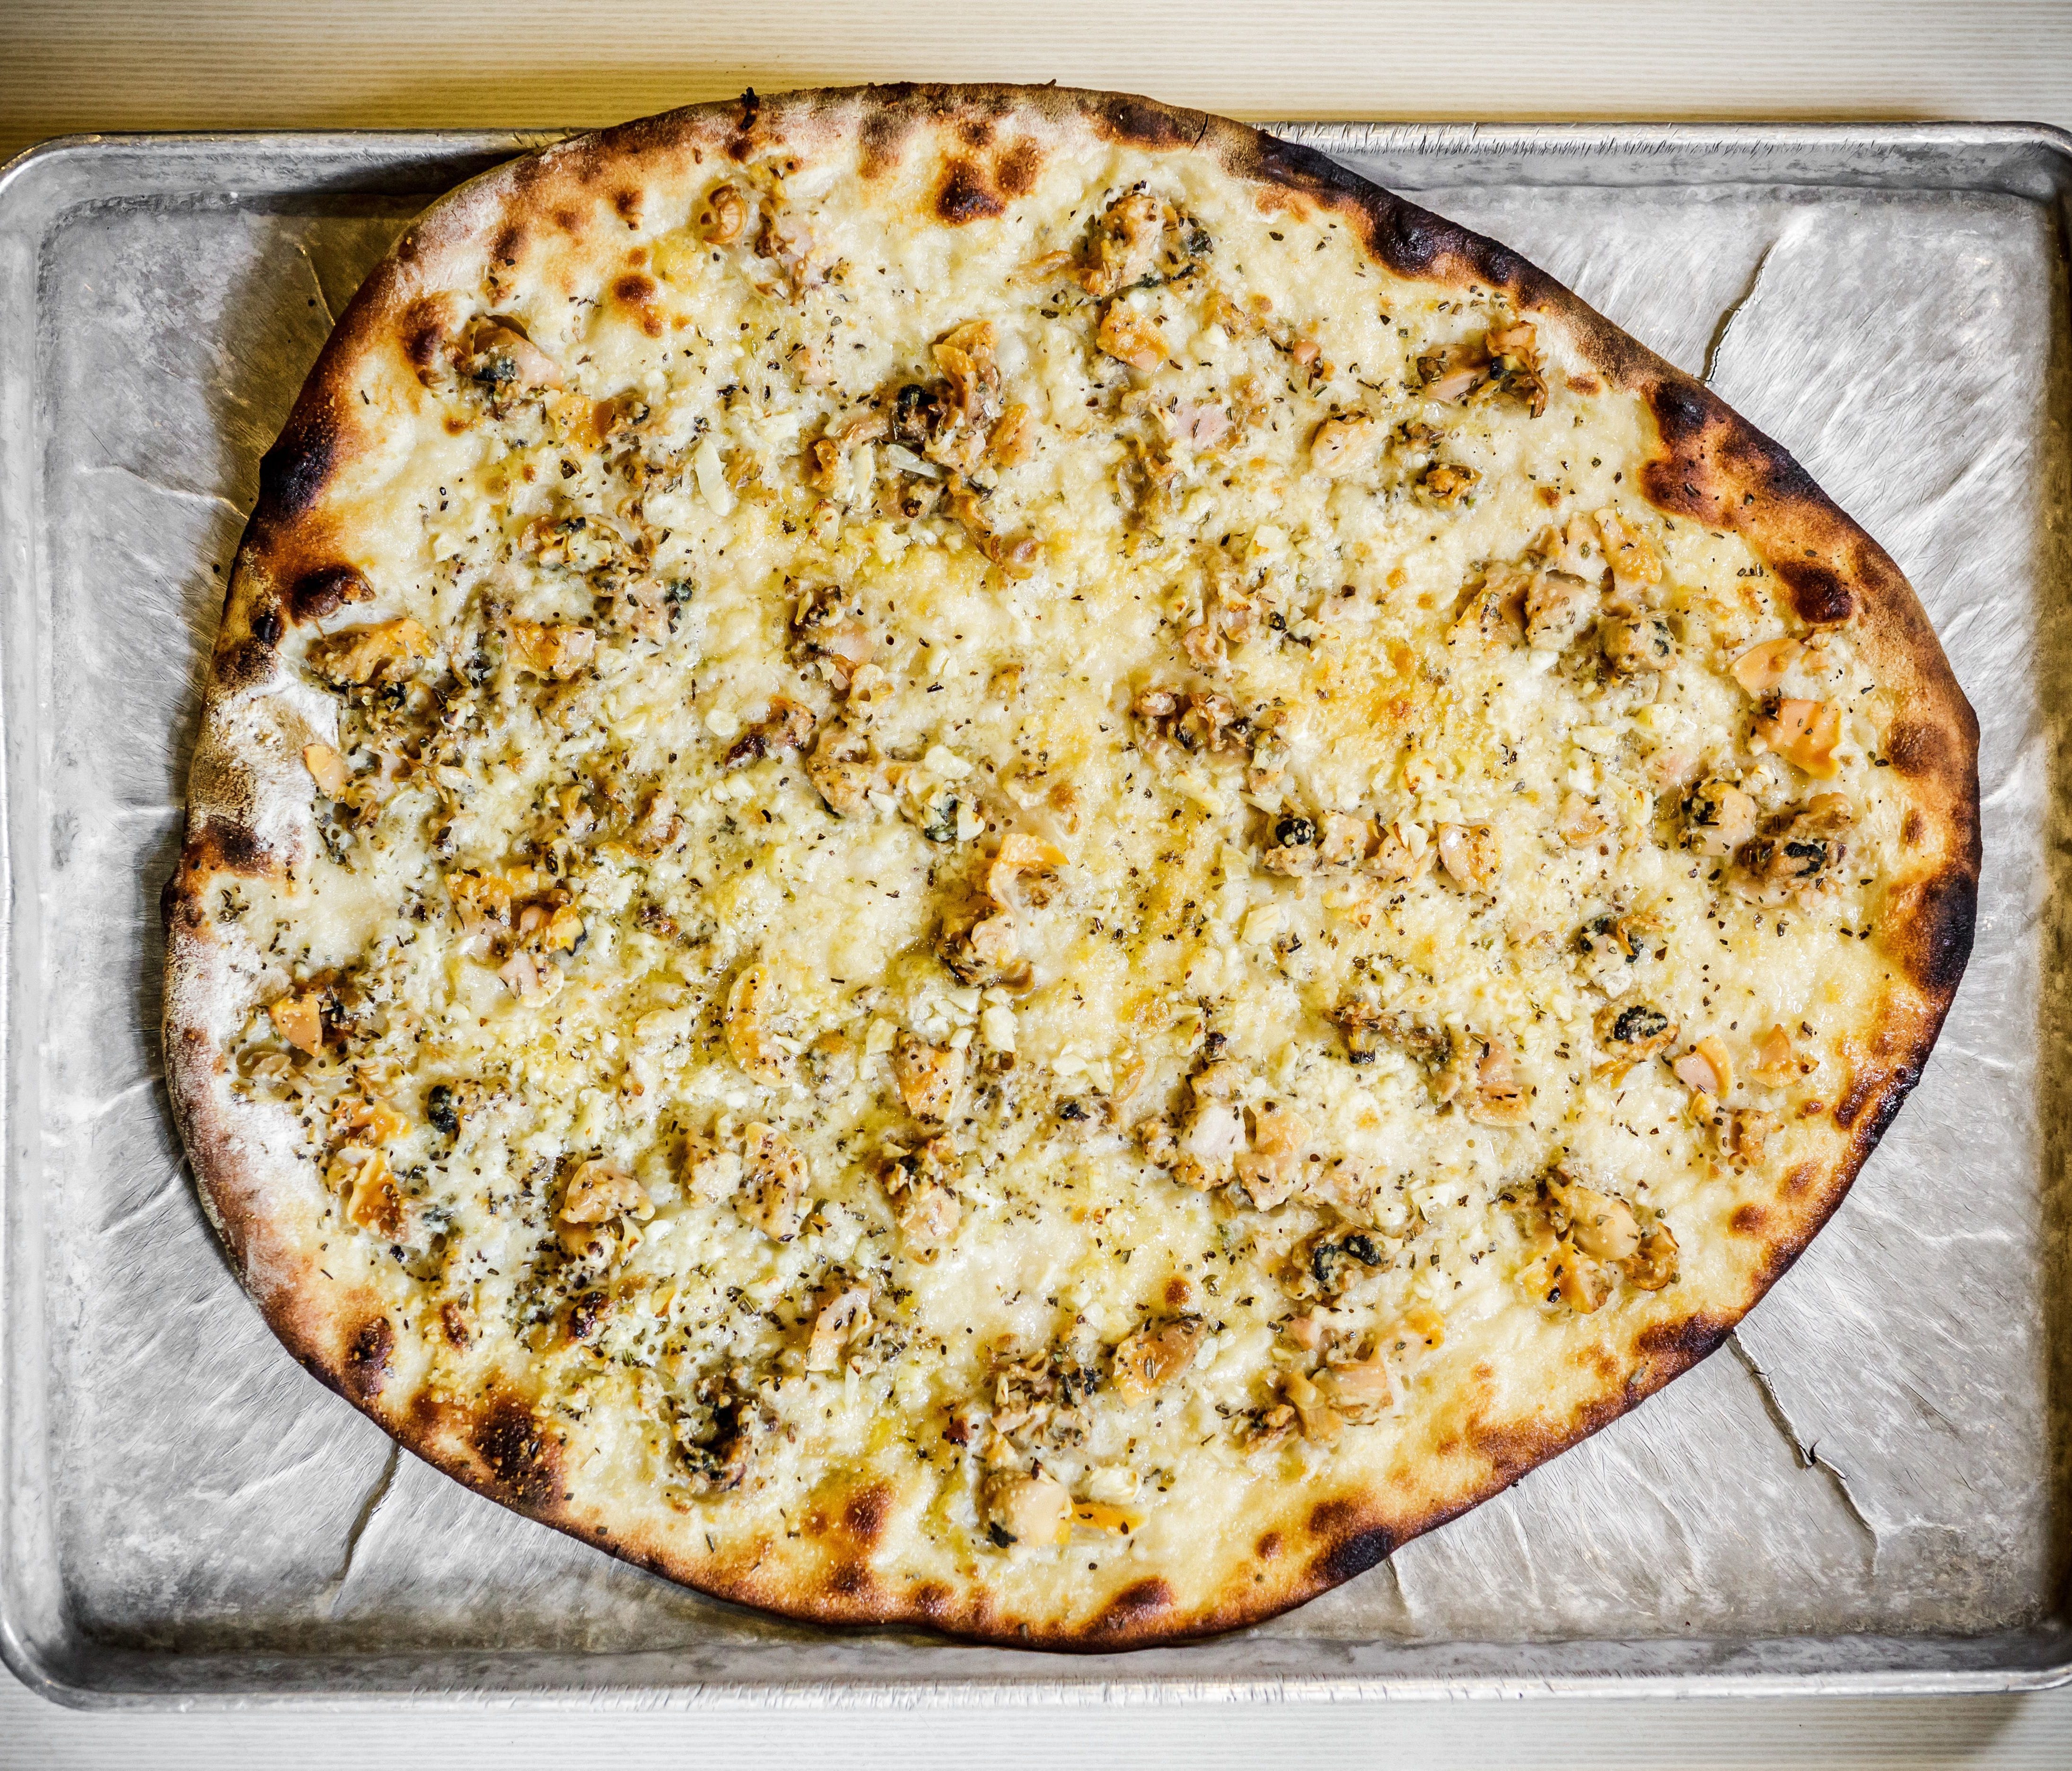 New Haven's signature white clam pizza was invented at Pepe's. While many have followed suit, Pepe's pie — a combination of fresh clams, grated cheese, olive oil, fresh garlic and oregano — is the undisputed champ.